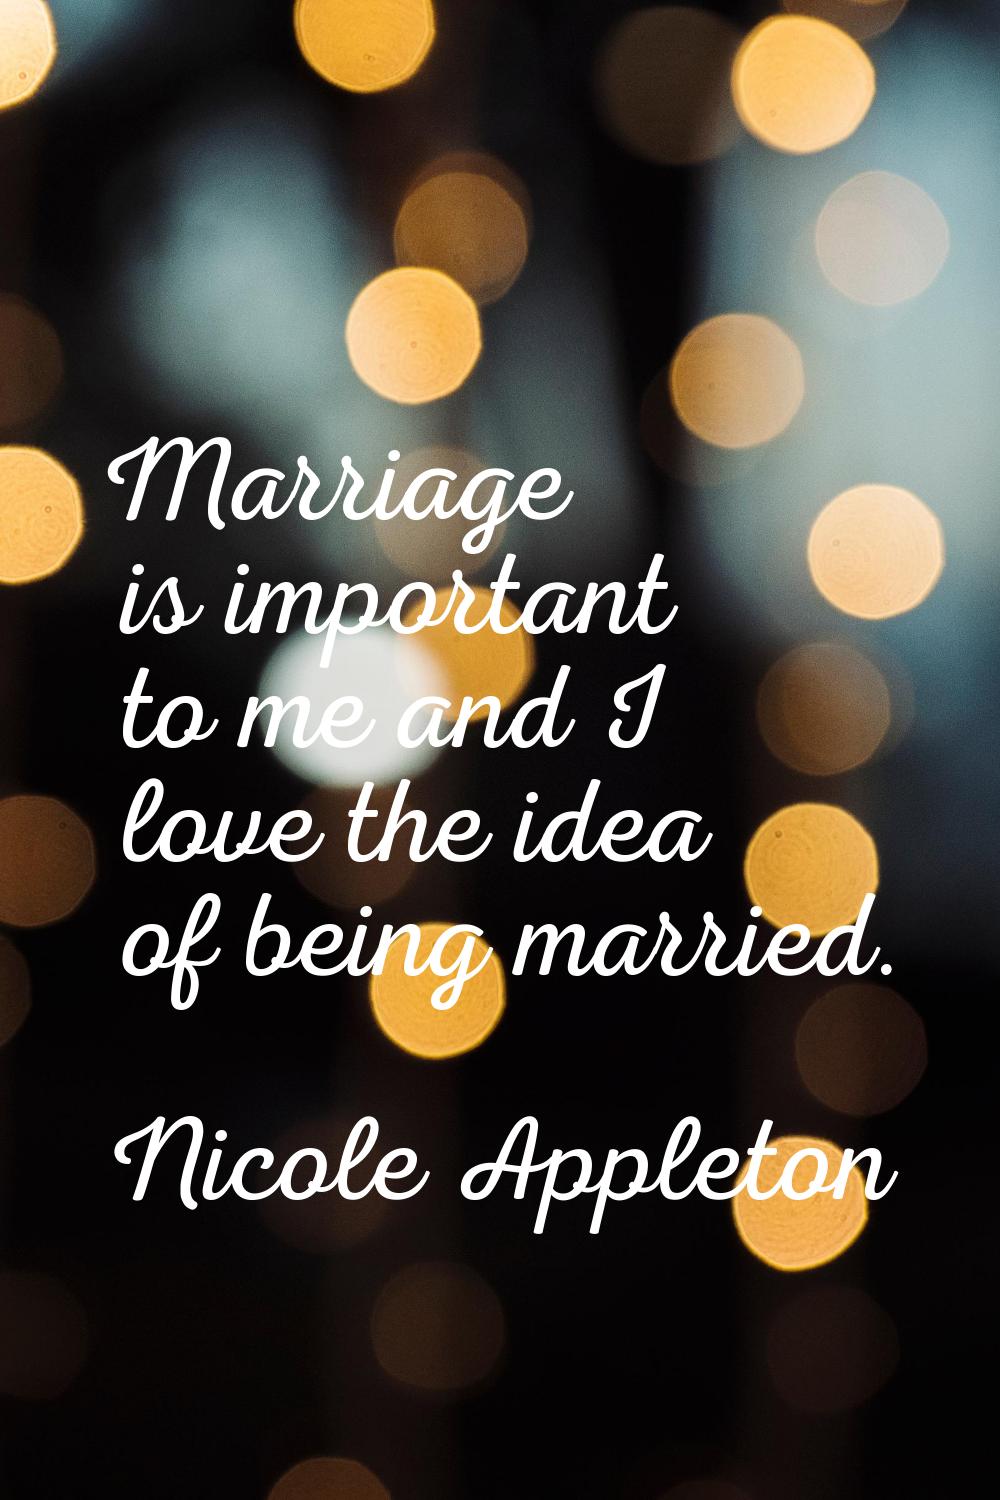 Marriage is important to me and I love the idea of being married.